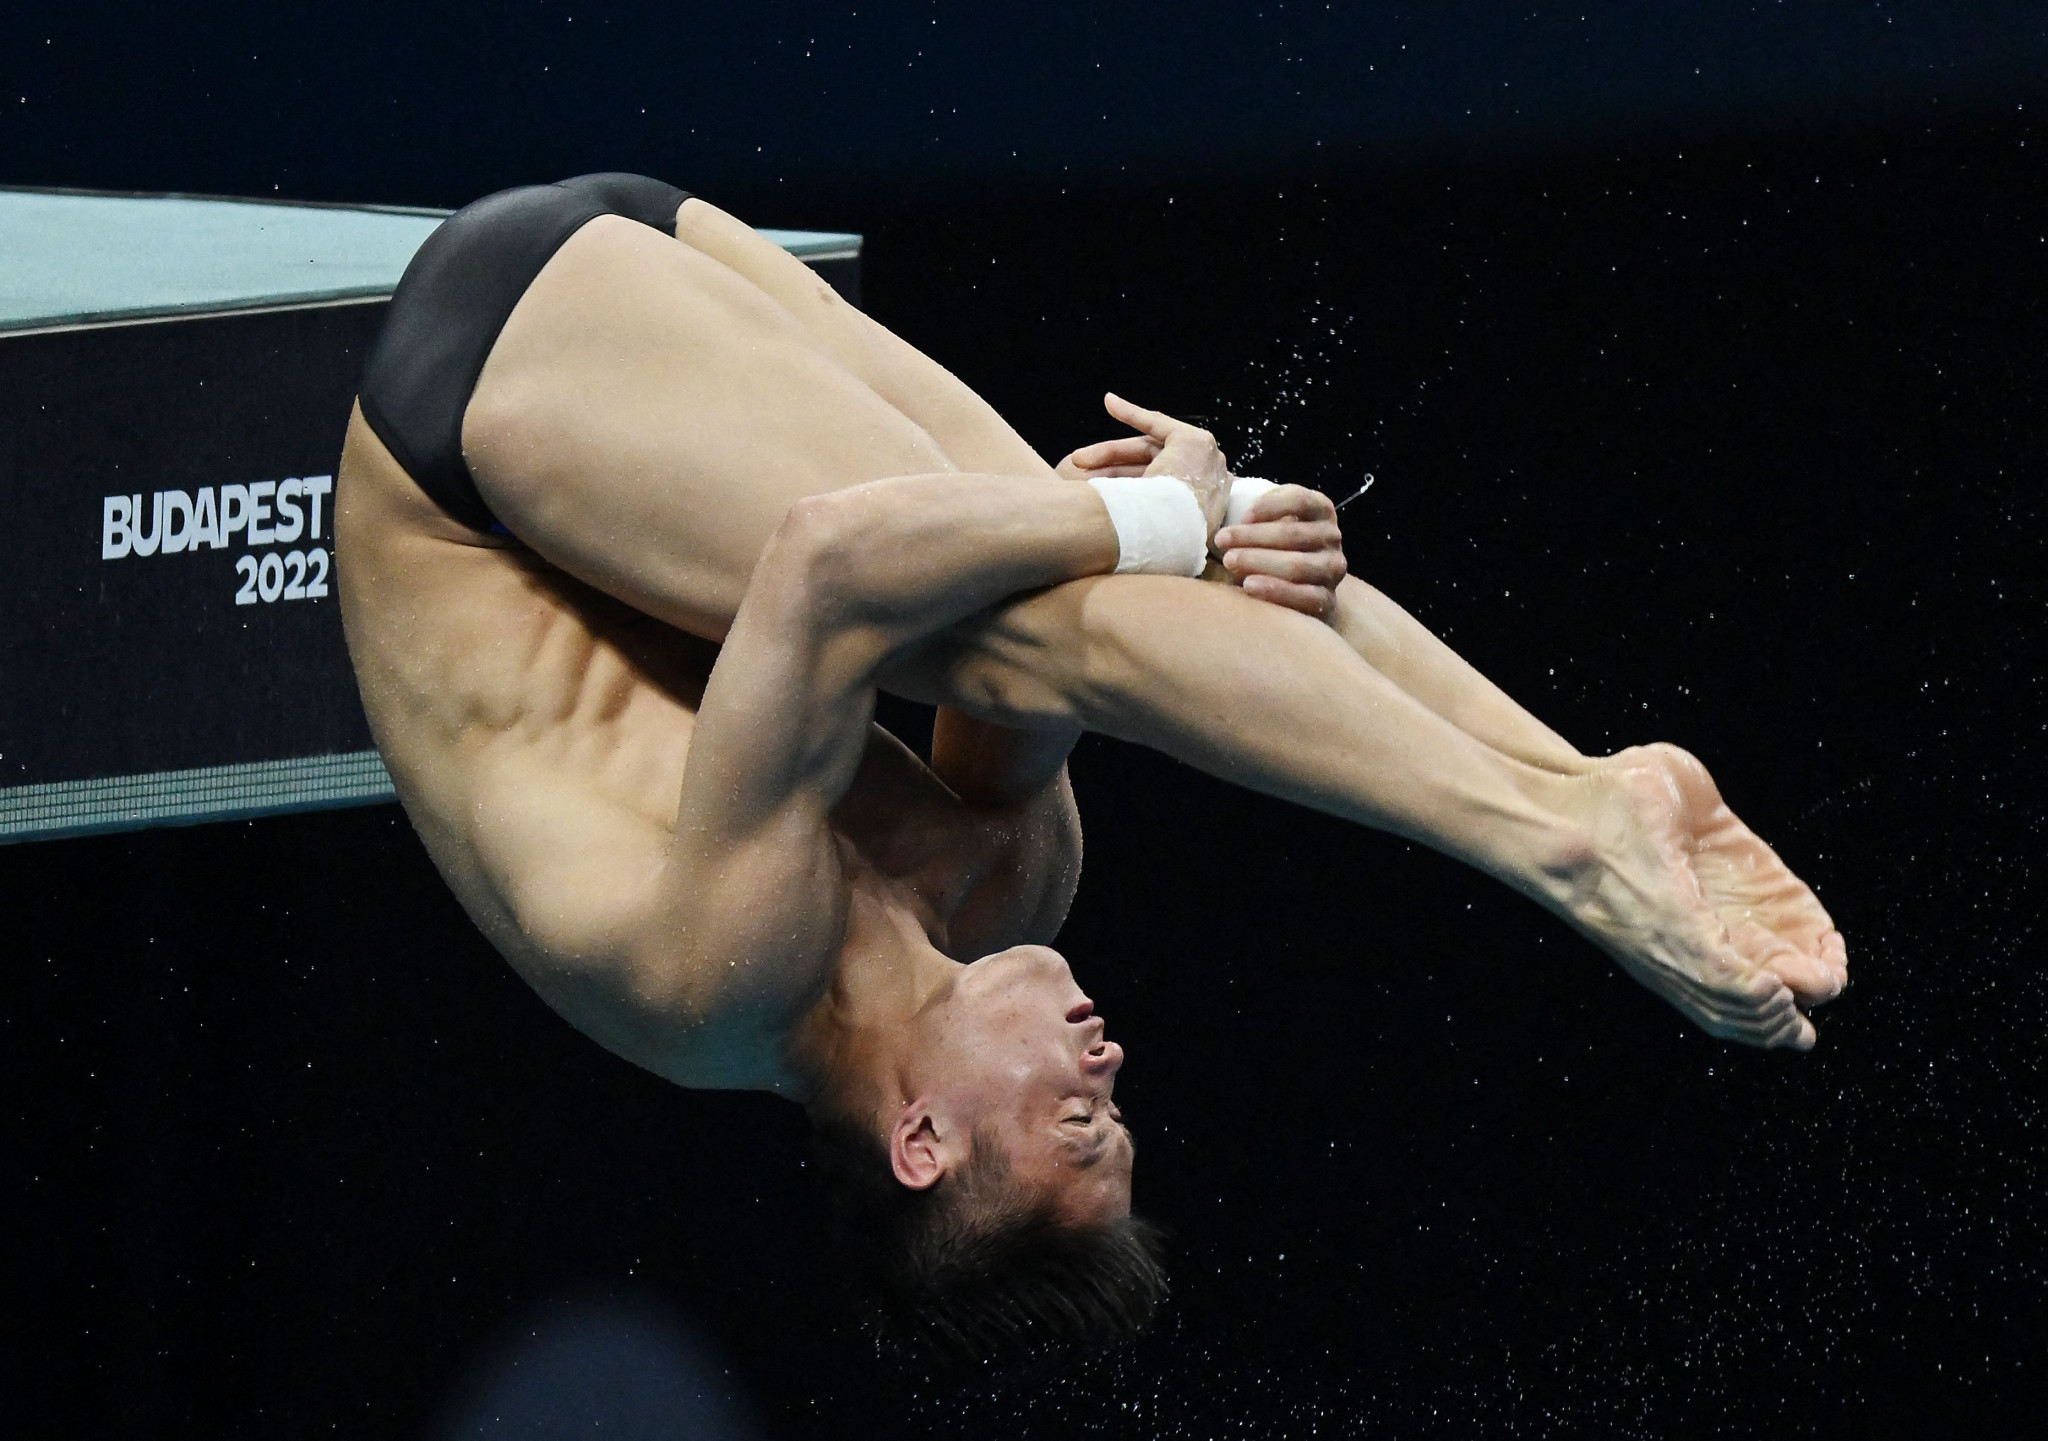 Yang Jian of China's final dive in the men's 10m platform final was a forward 4.5 somersaults pike worth 102.50 points ©Getty Images